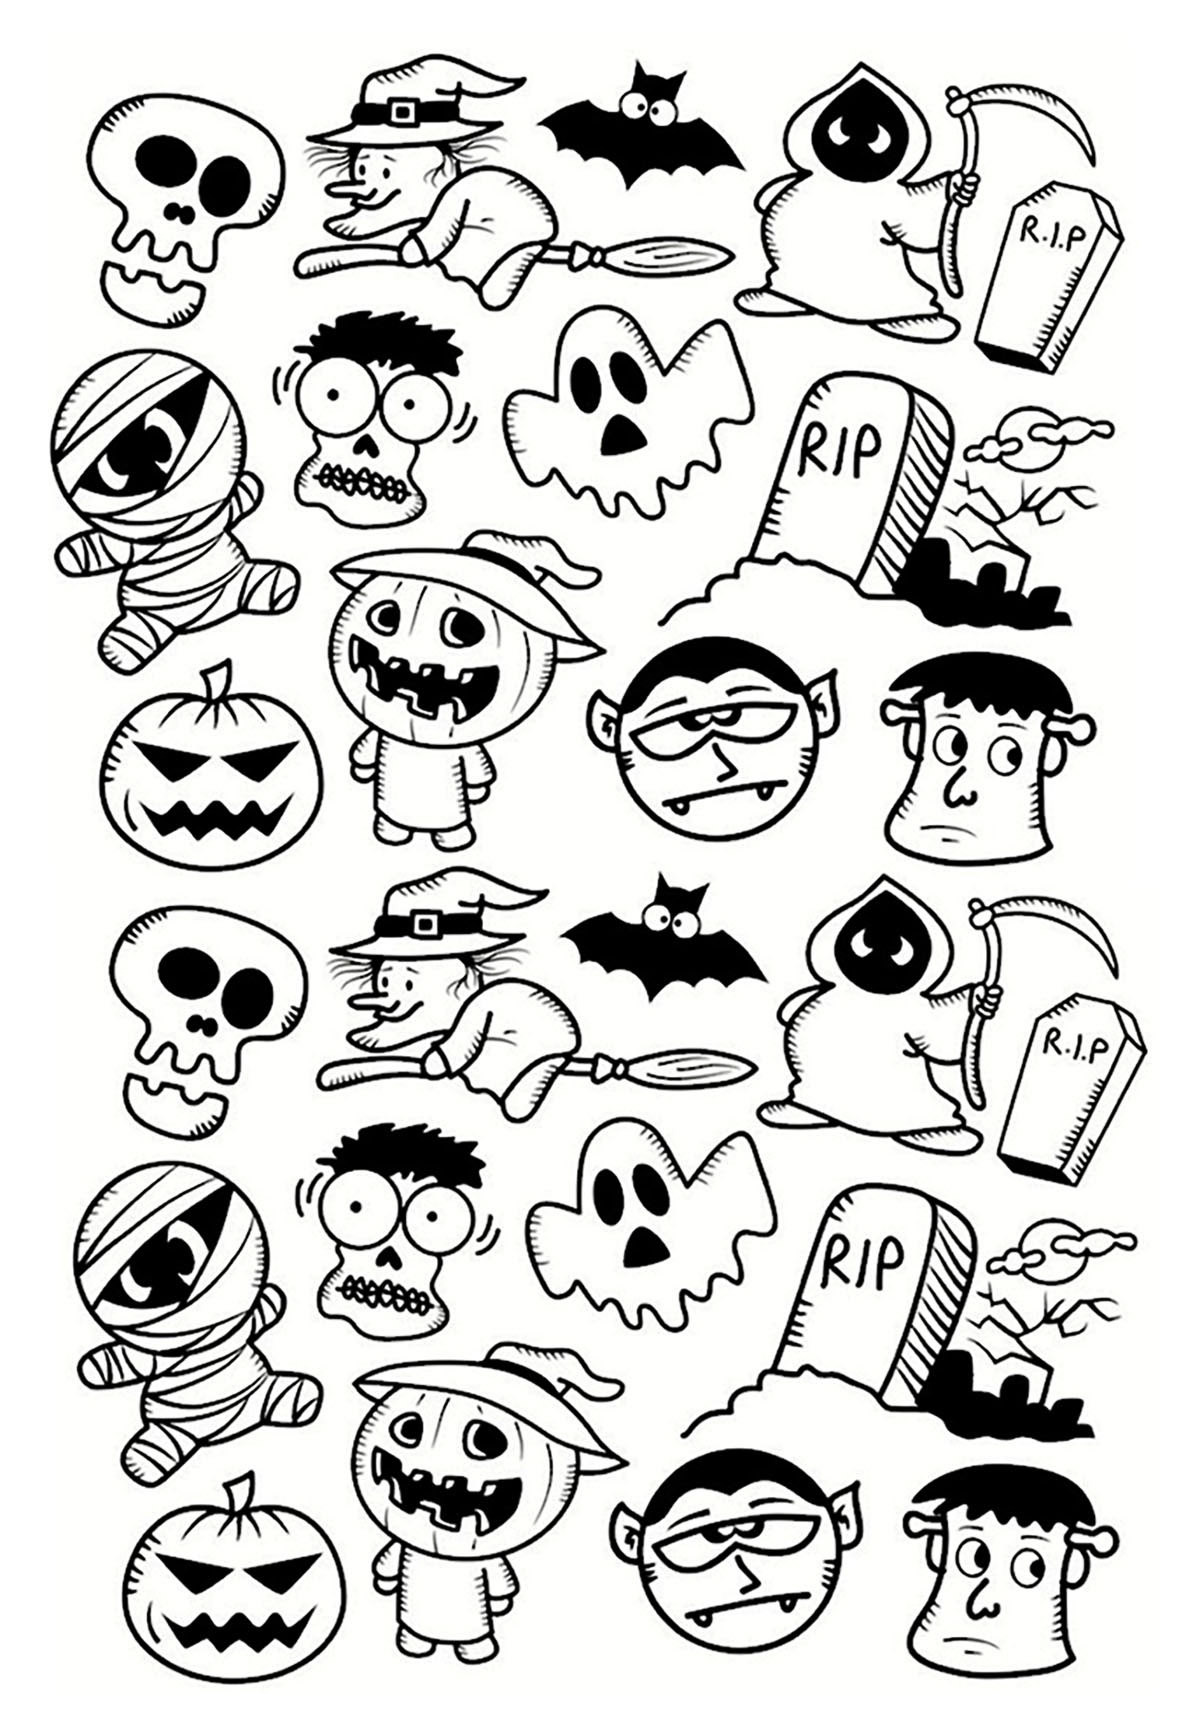 Halloween coloring page to download for free